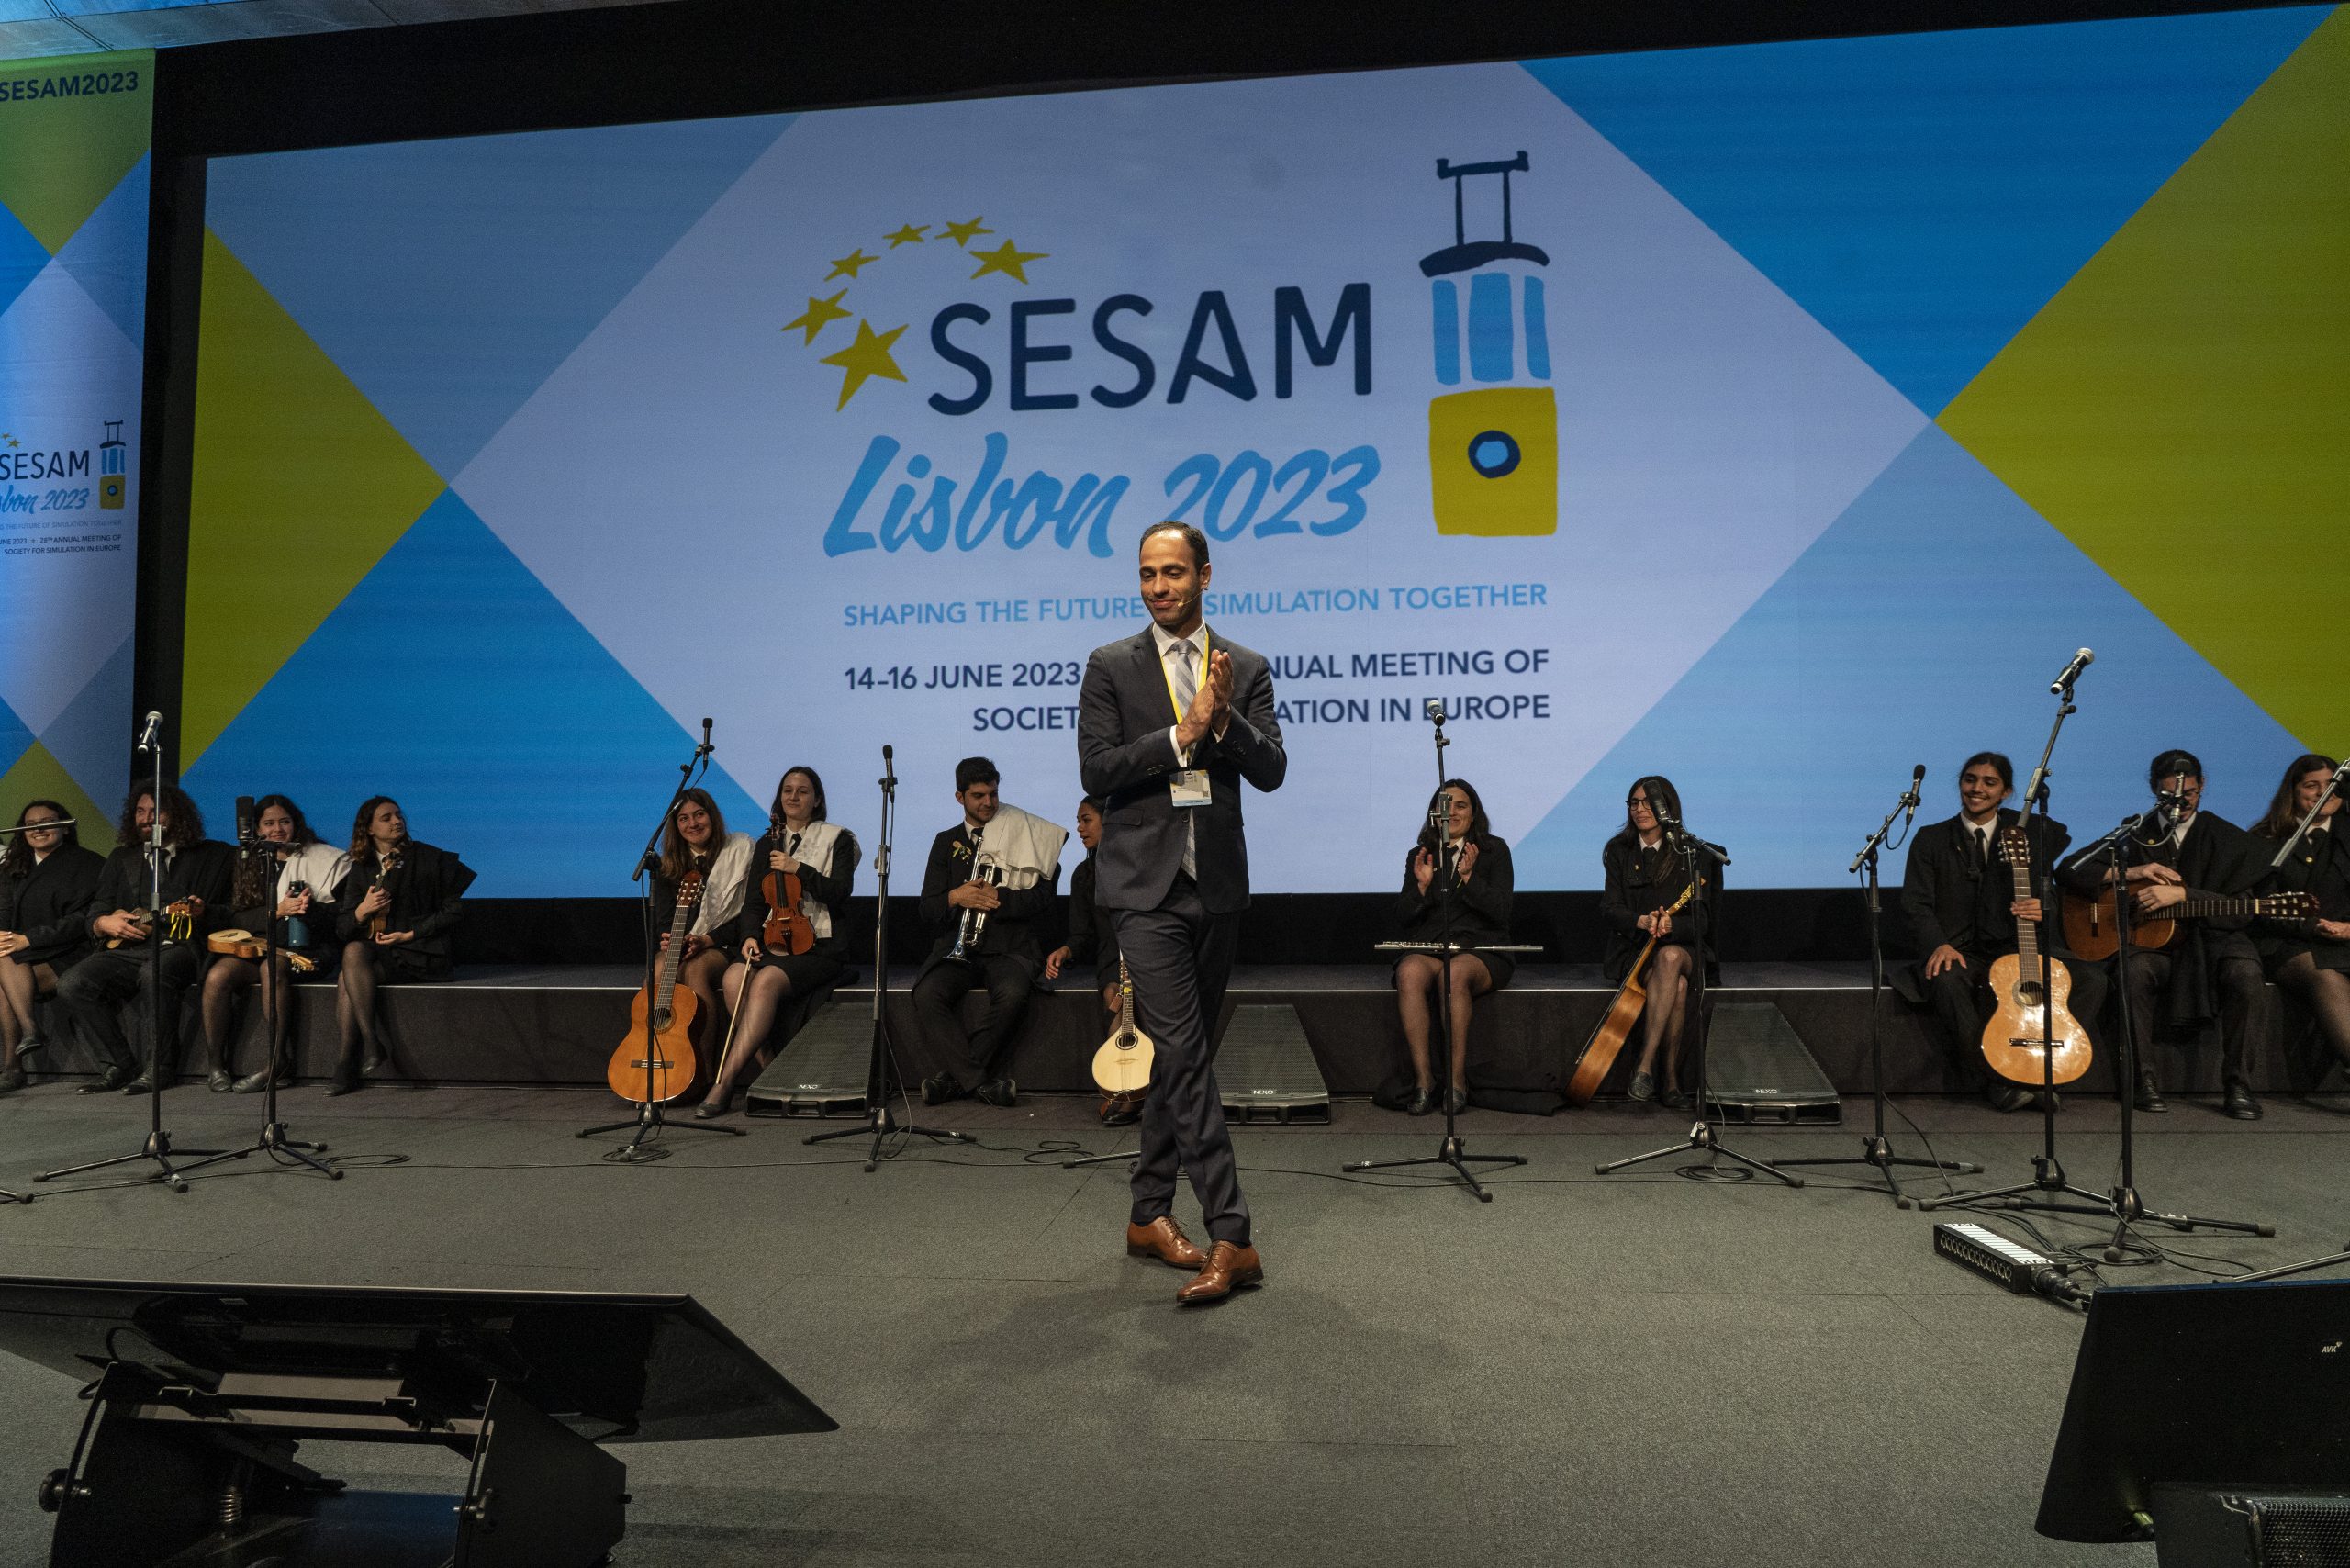 <strong>SESAM 2023, networking, learning and inspiration</strong>